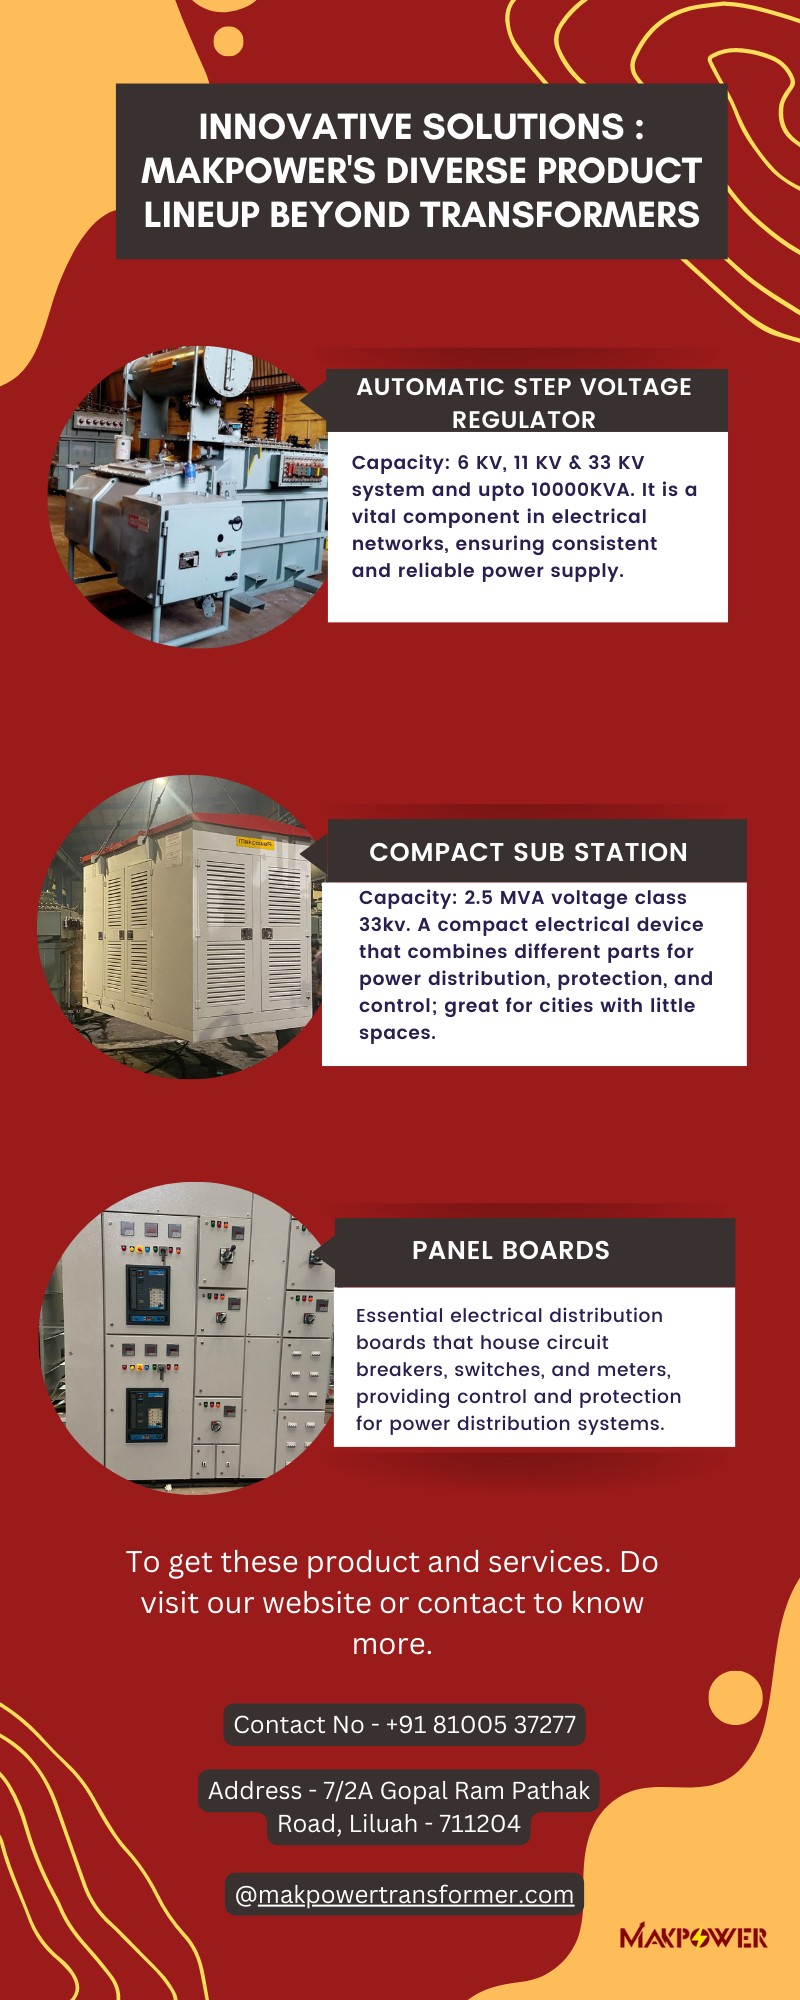 Innovative Solutions : Makpower's Diverse Product Lineup Beyond Transformers